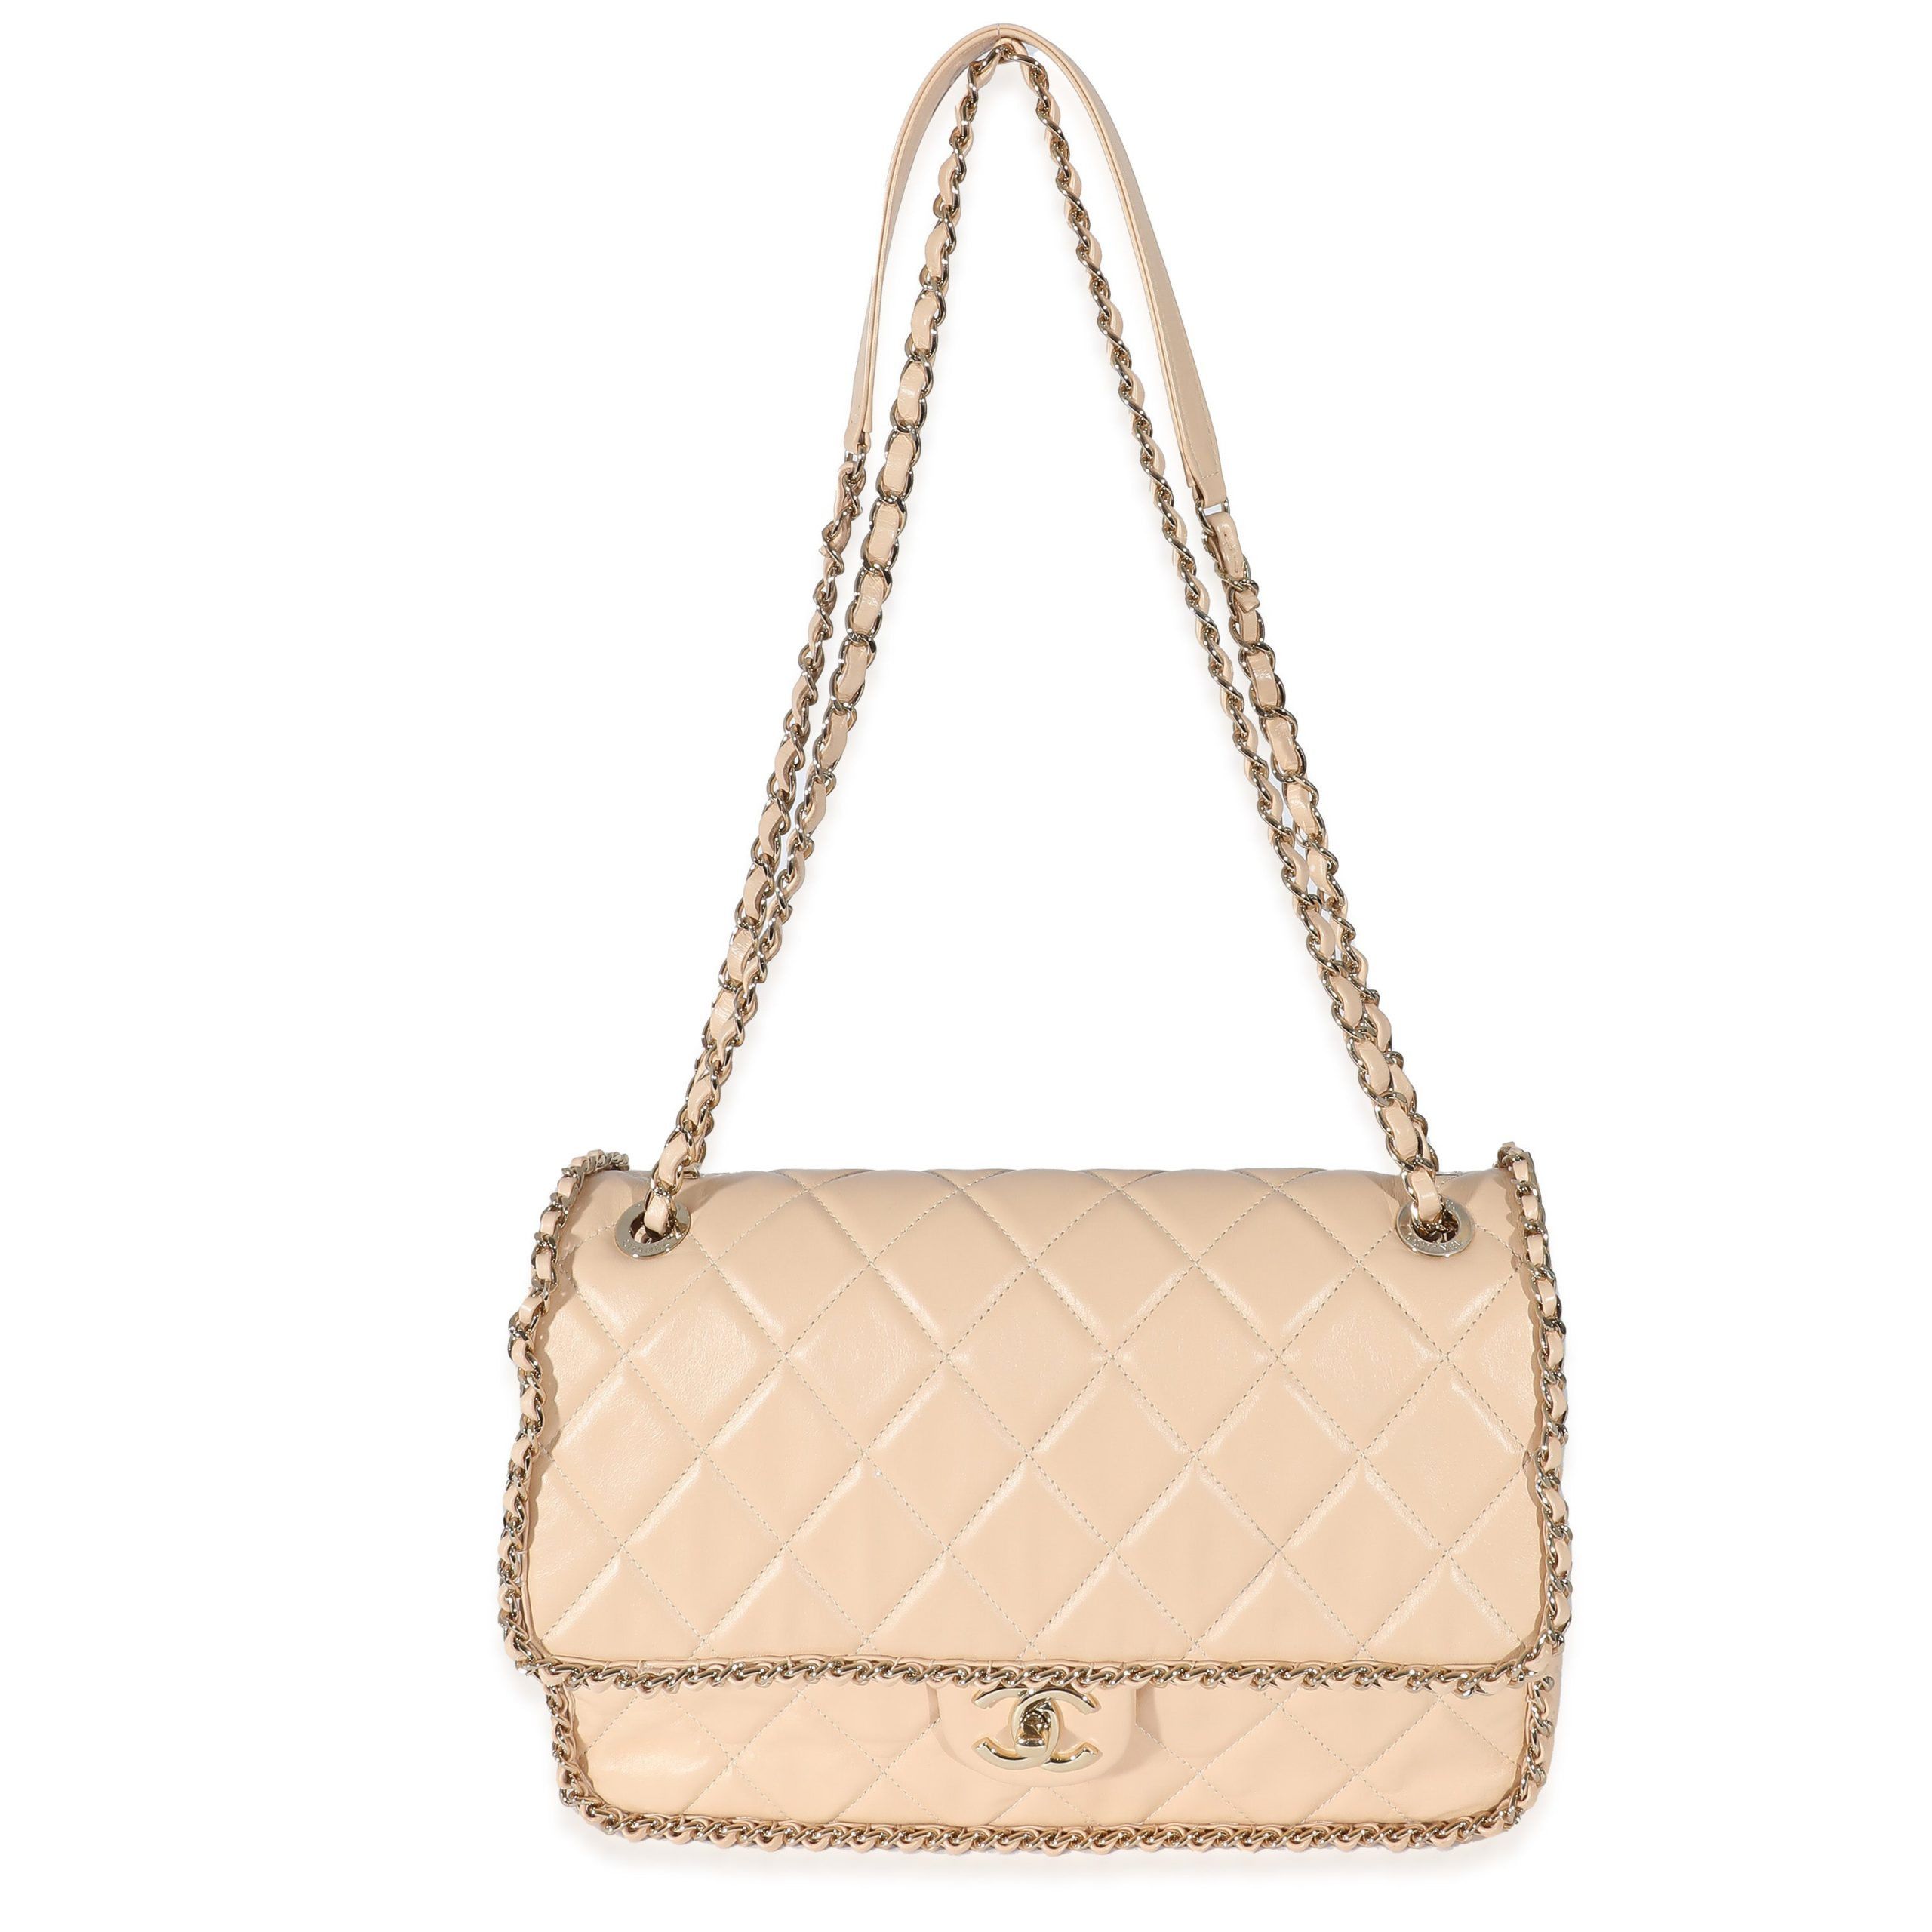 Chanel Chanel Beige Crumpled Calfskin Medium Chain All Over Flap Bag Size ONE SIZE - 3 Thumbnail